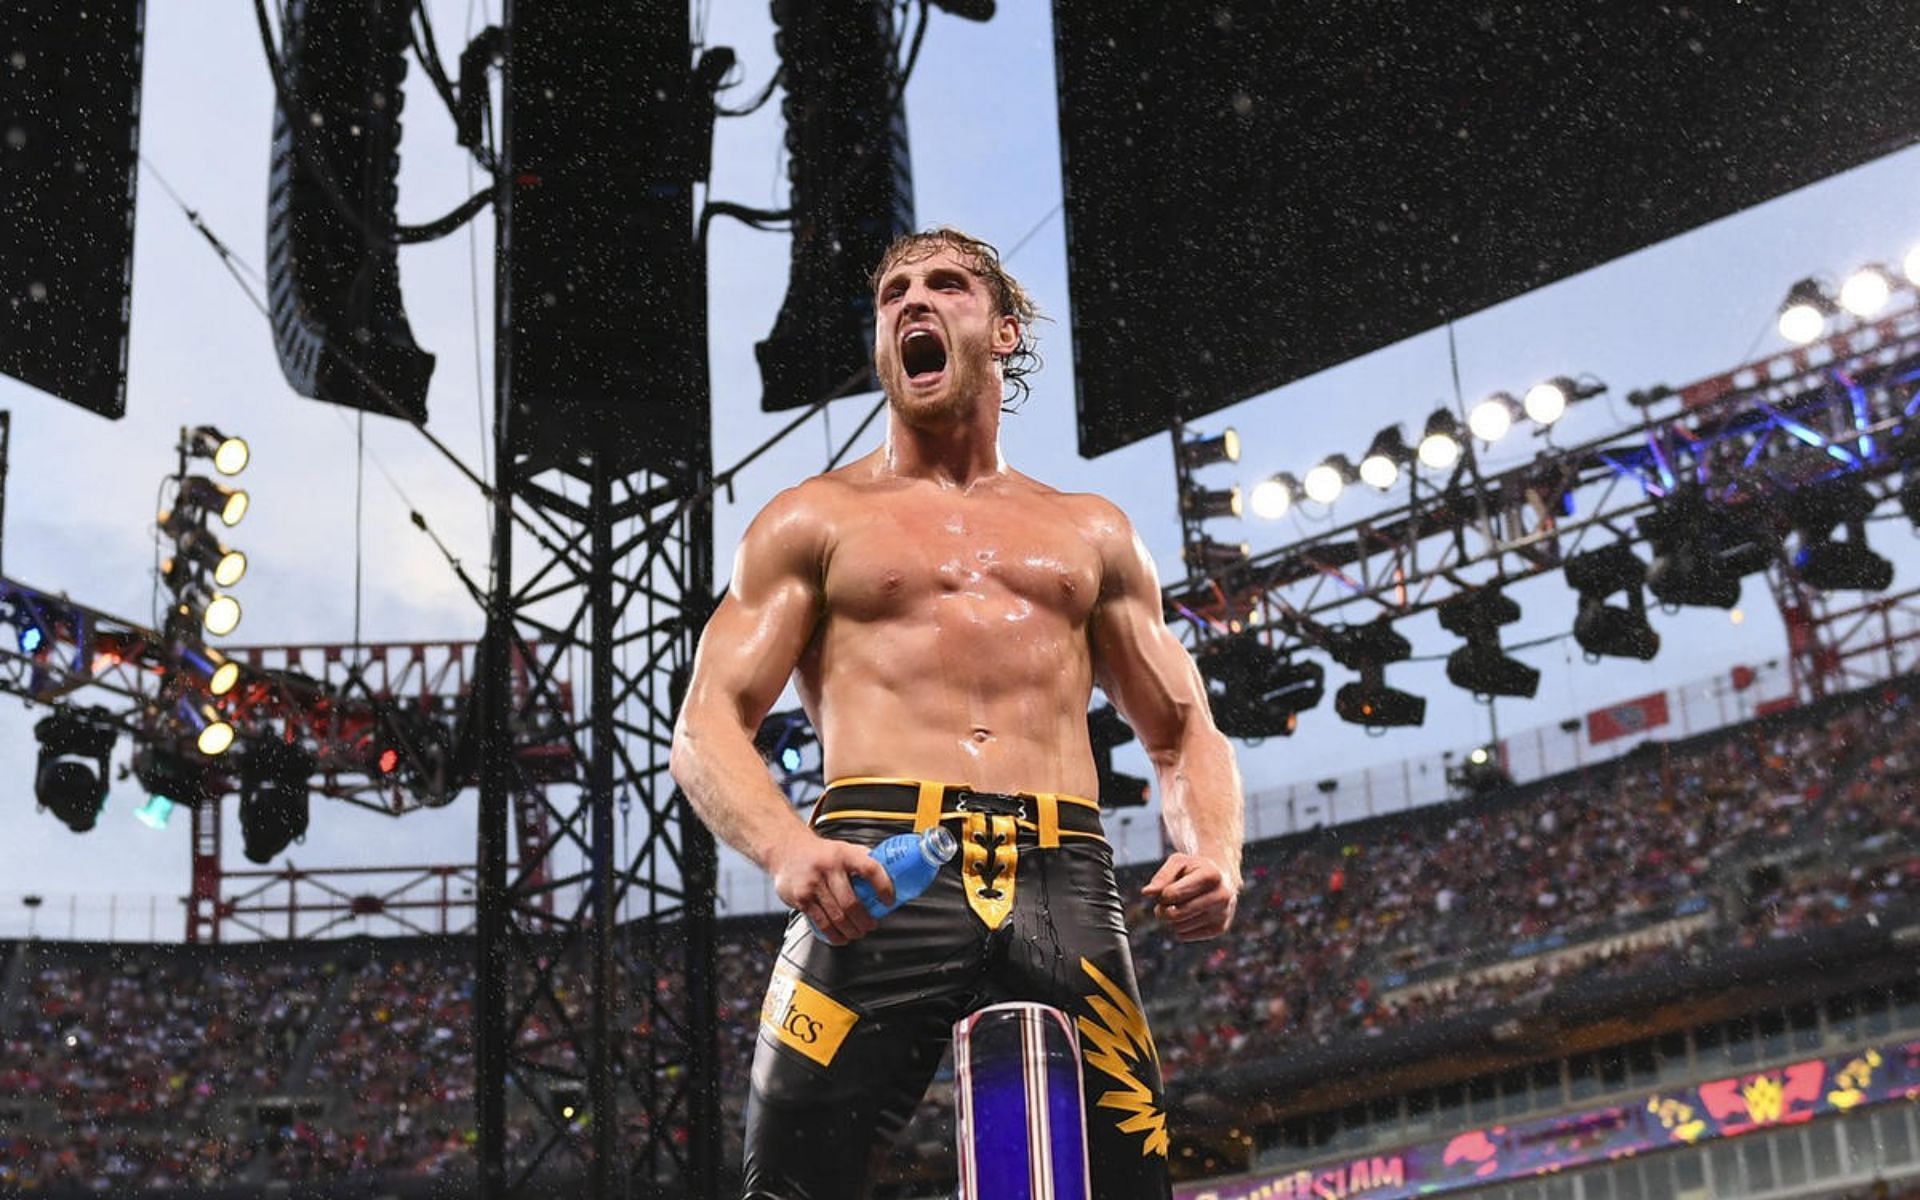 Logan Paul is currently undefeated in WWE!